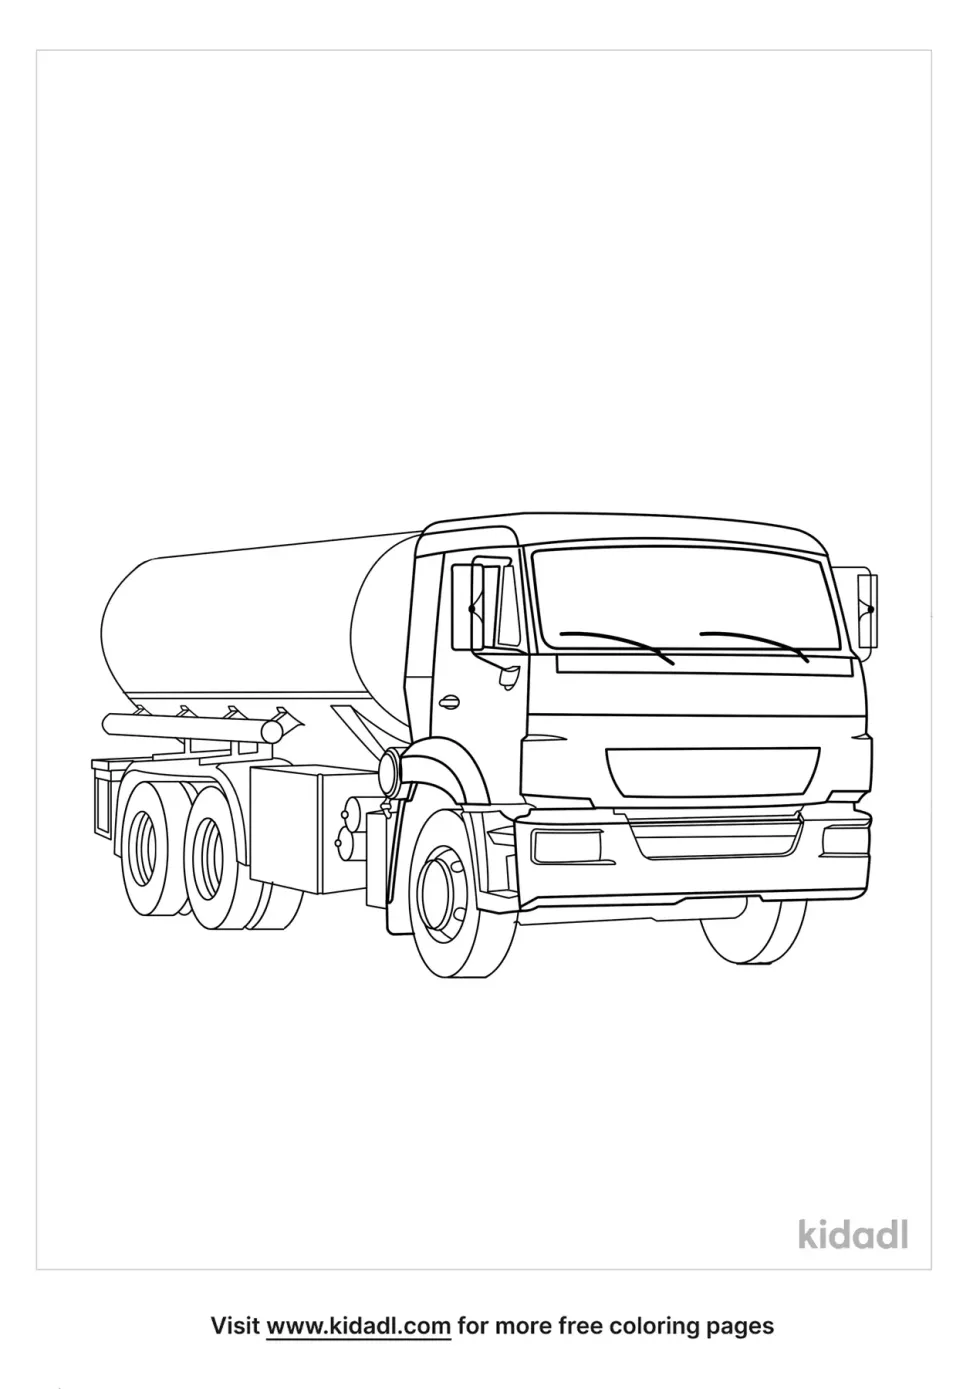 Fuel Truck Coloring Page